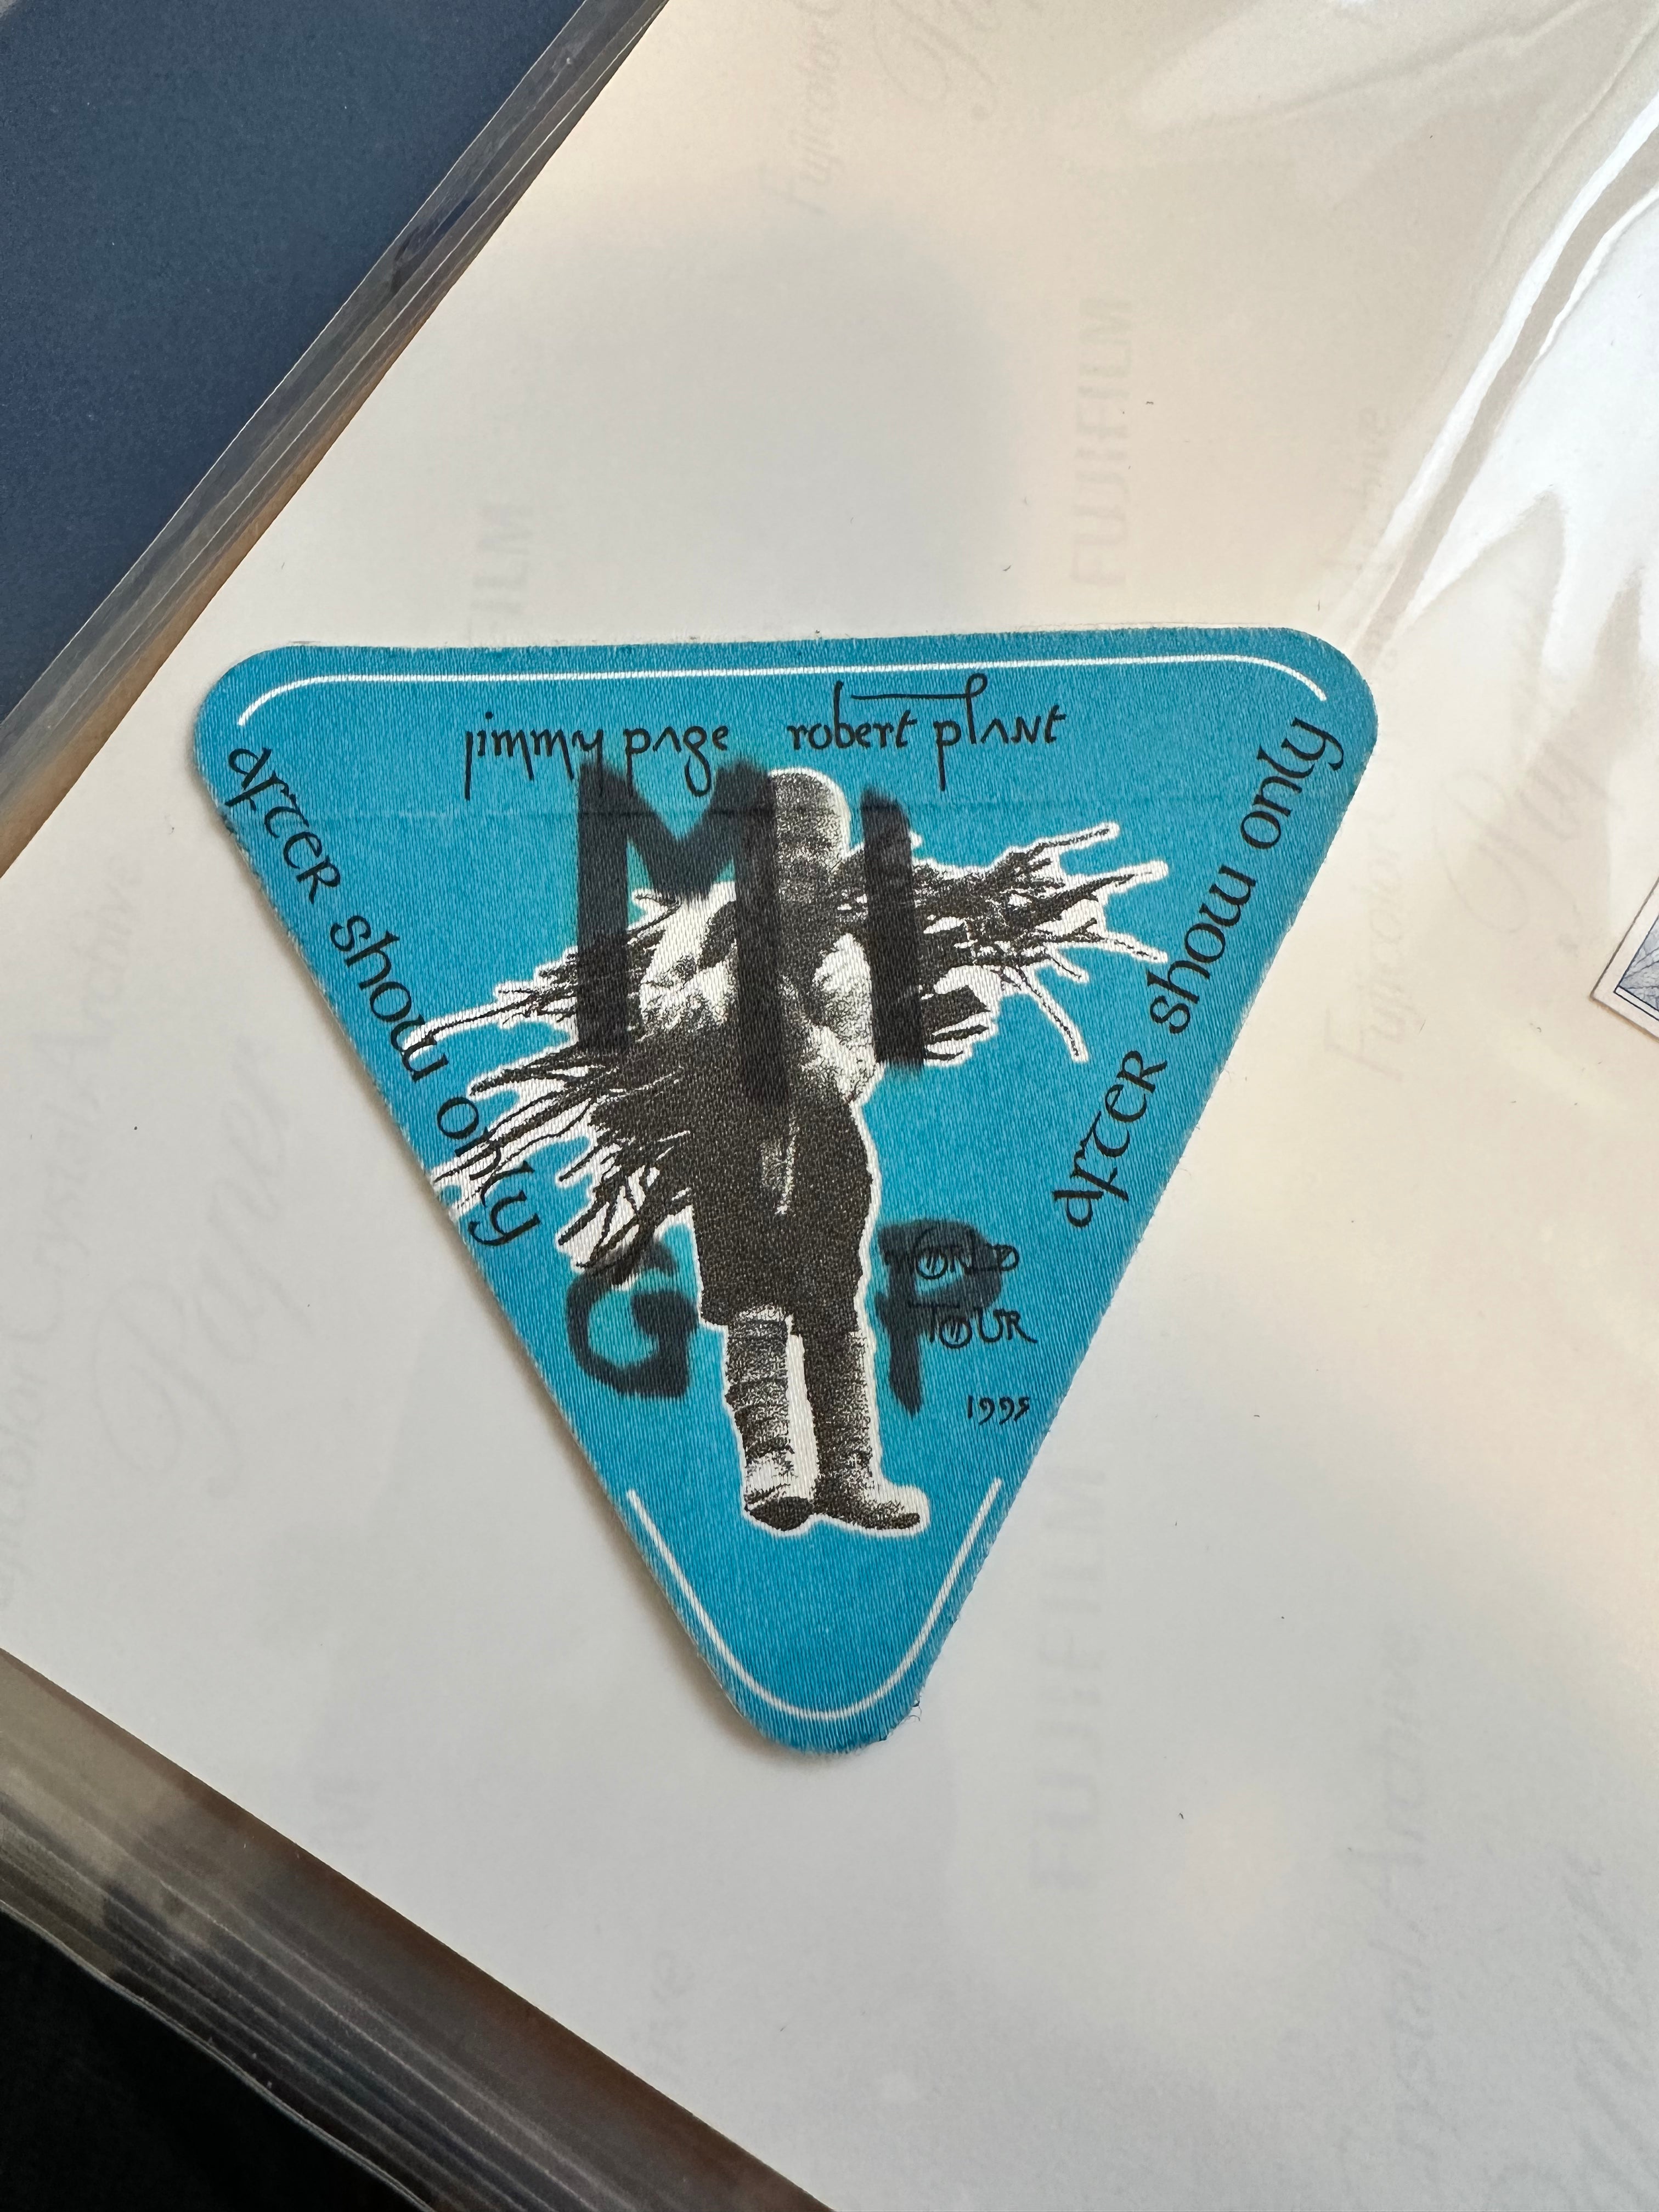 Robert Plant and Jimmy page rare backstage pass